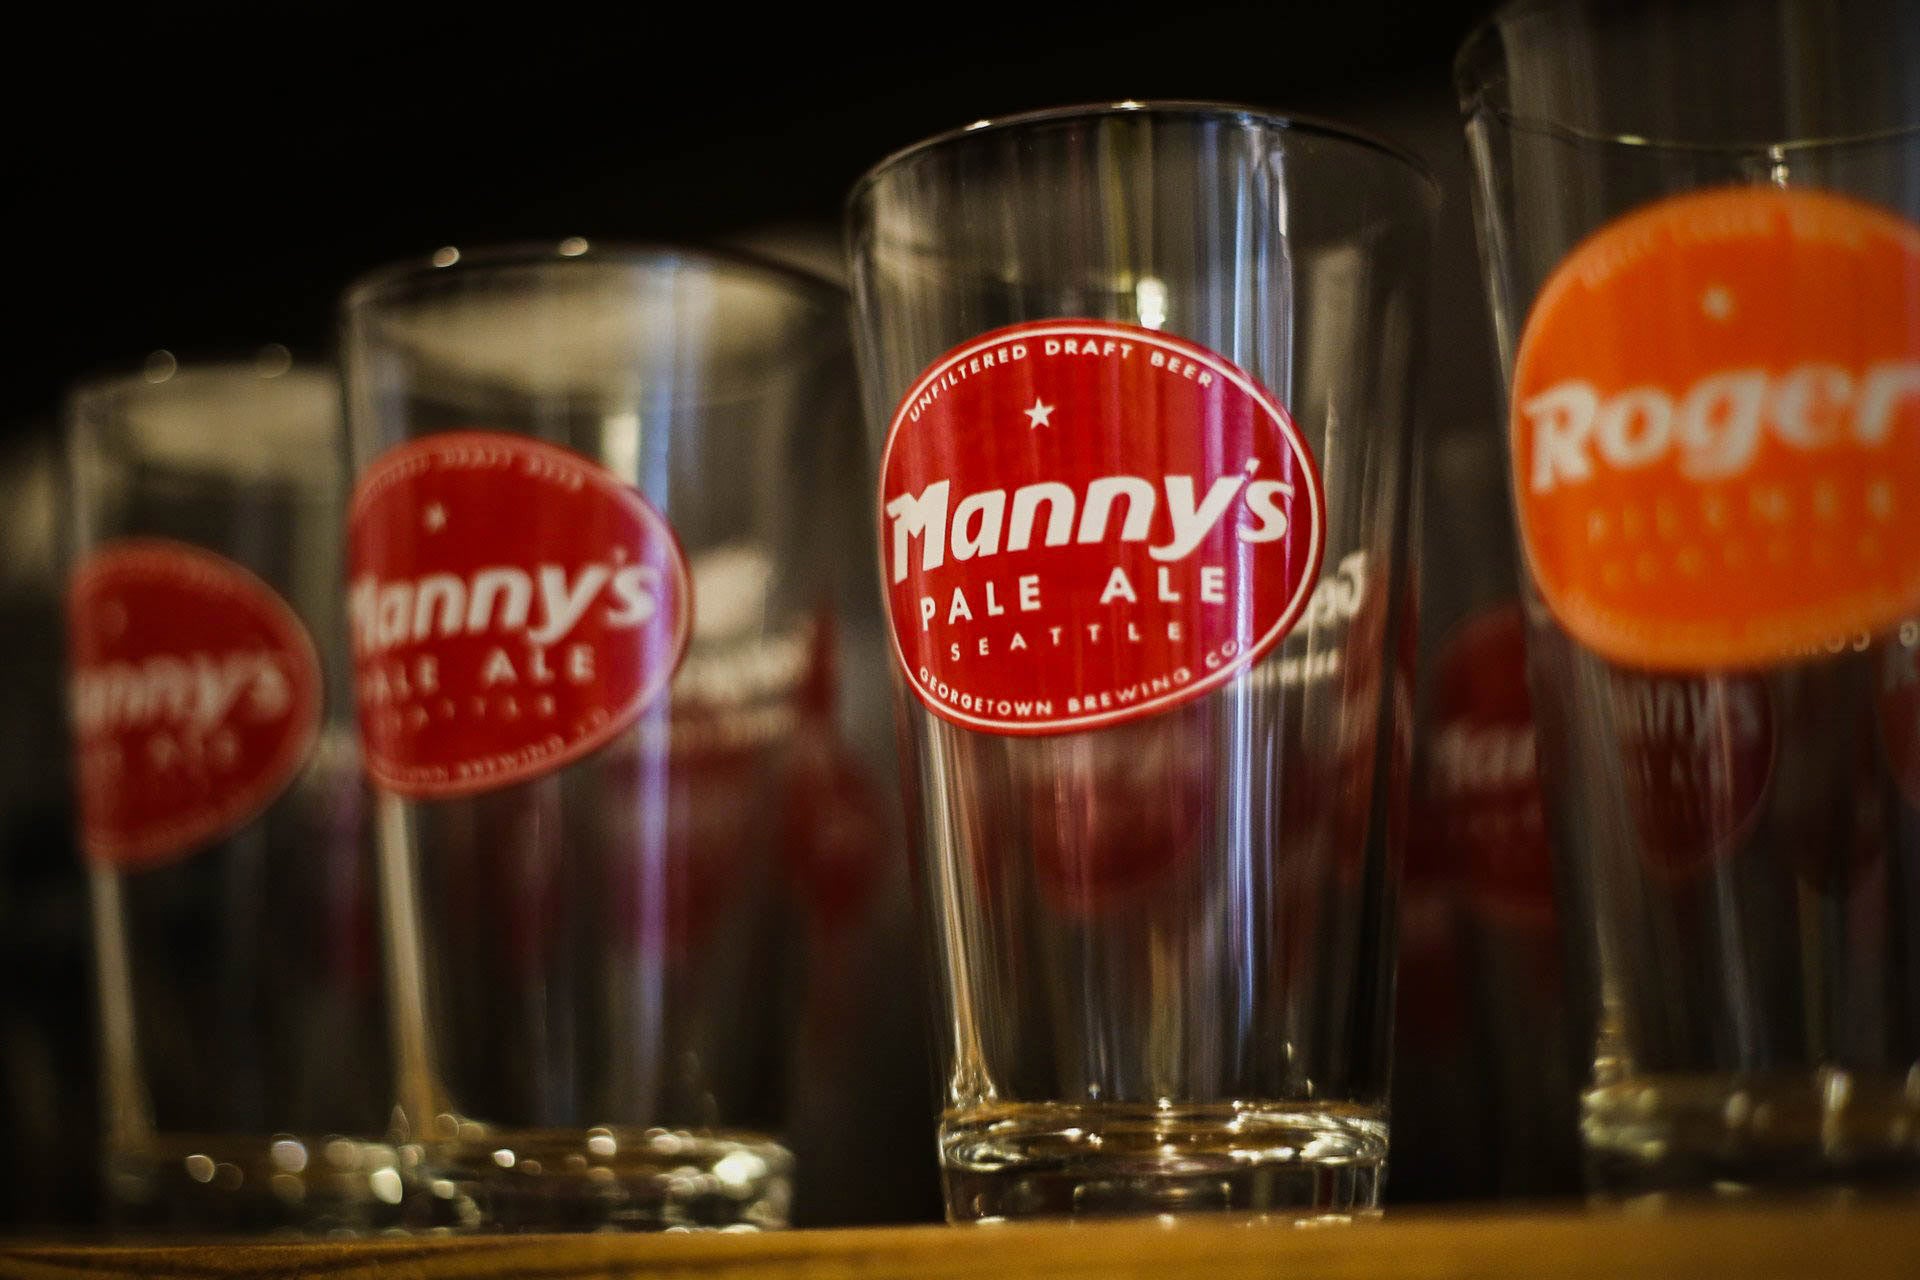 pint glasses with manny's and roger's logos lined up for sale